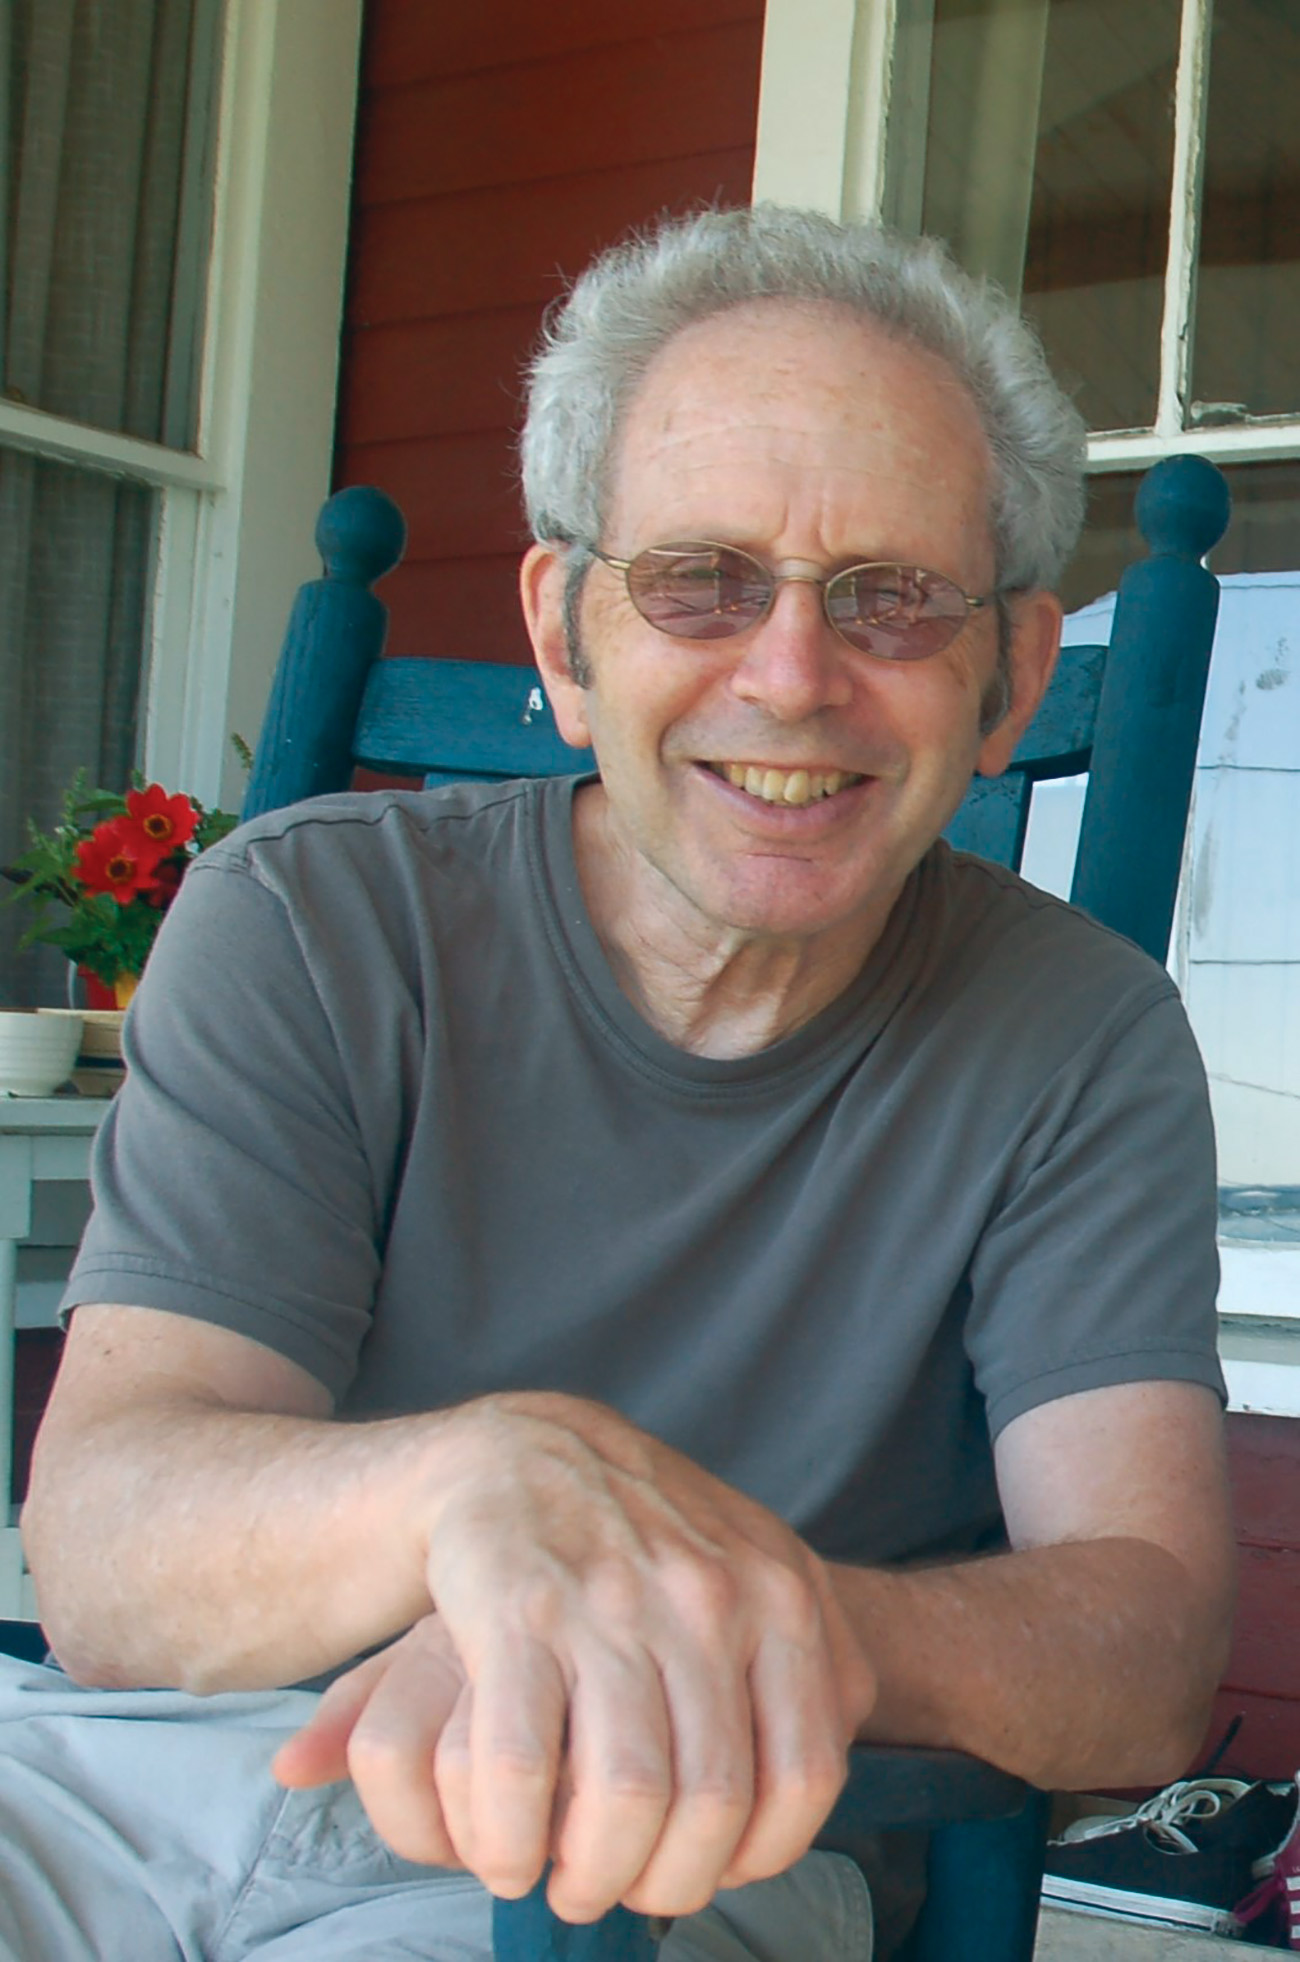 Photo of Peter Guralnick with glasses on sitting in a teal rocking chair on a porch.